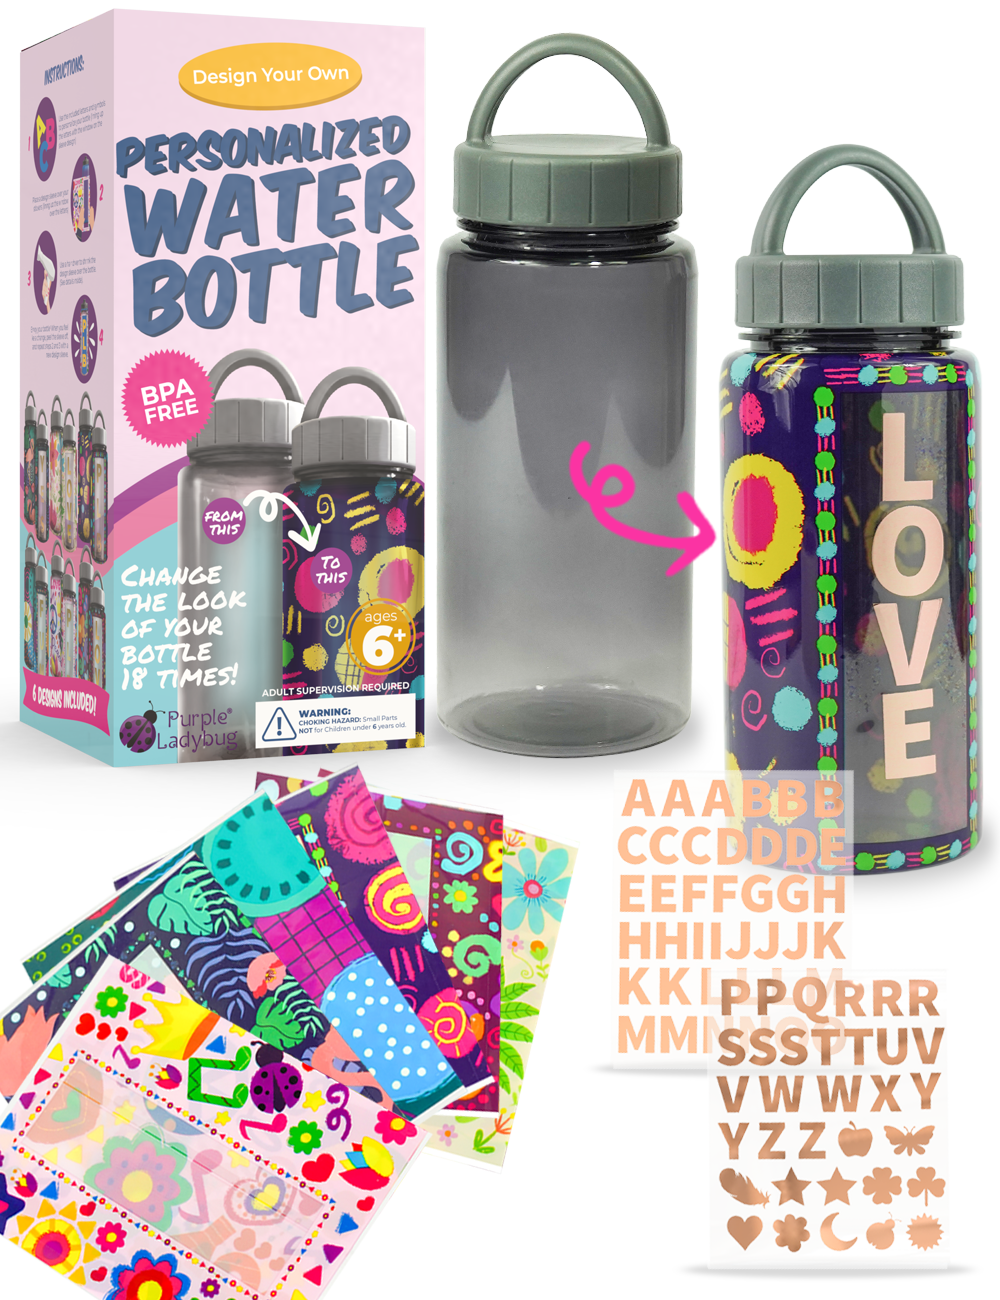 Personalize Your Own Water Bottle with Shrink Wraps